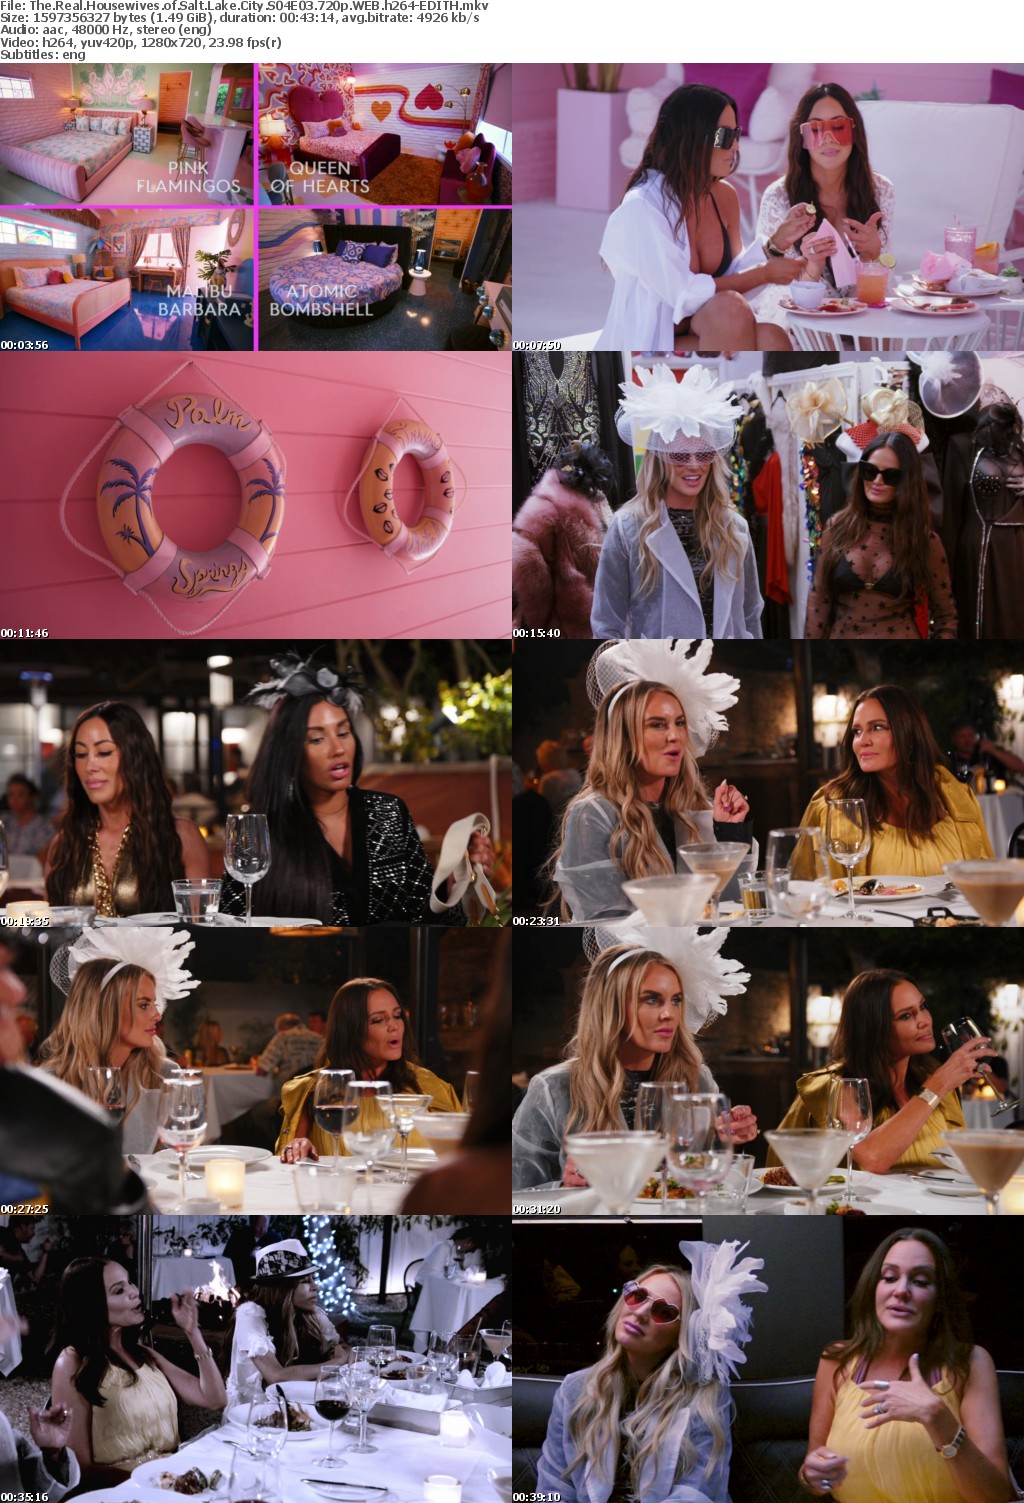 The Real Housewives of Salt Lake City S04E03 720p WEB h264-EDITH